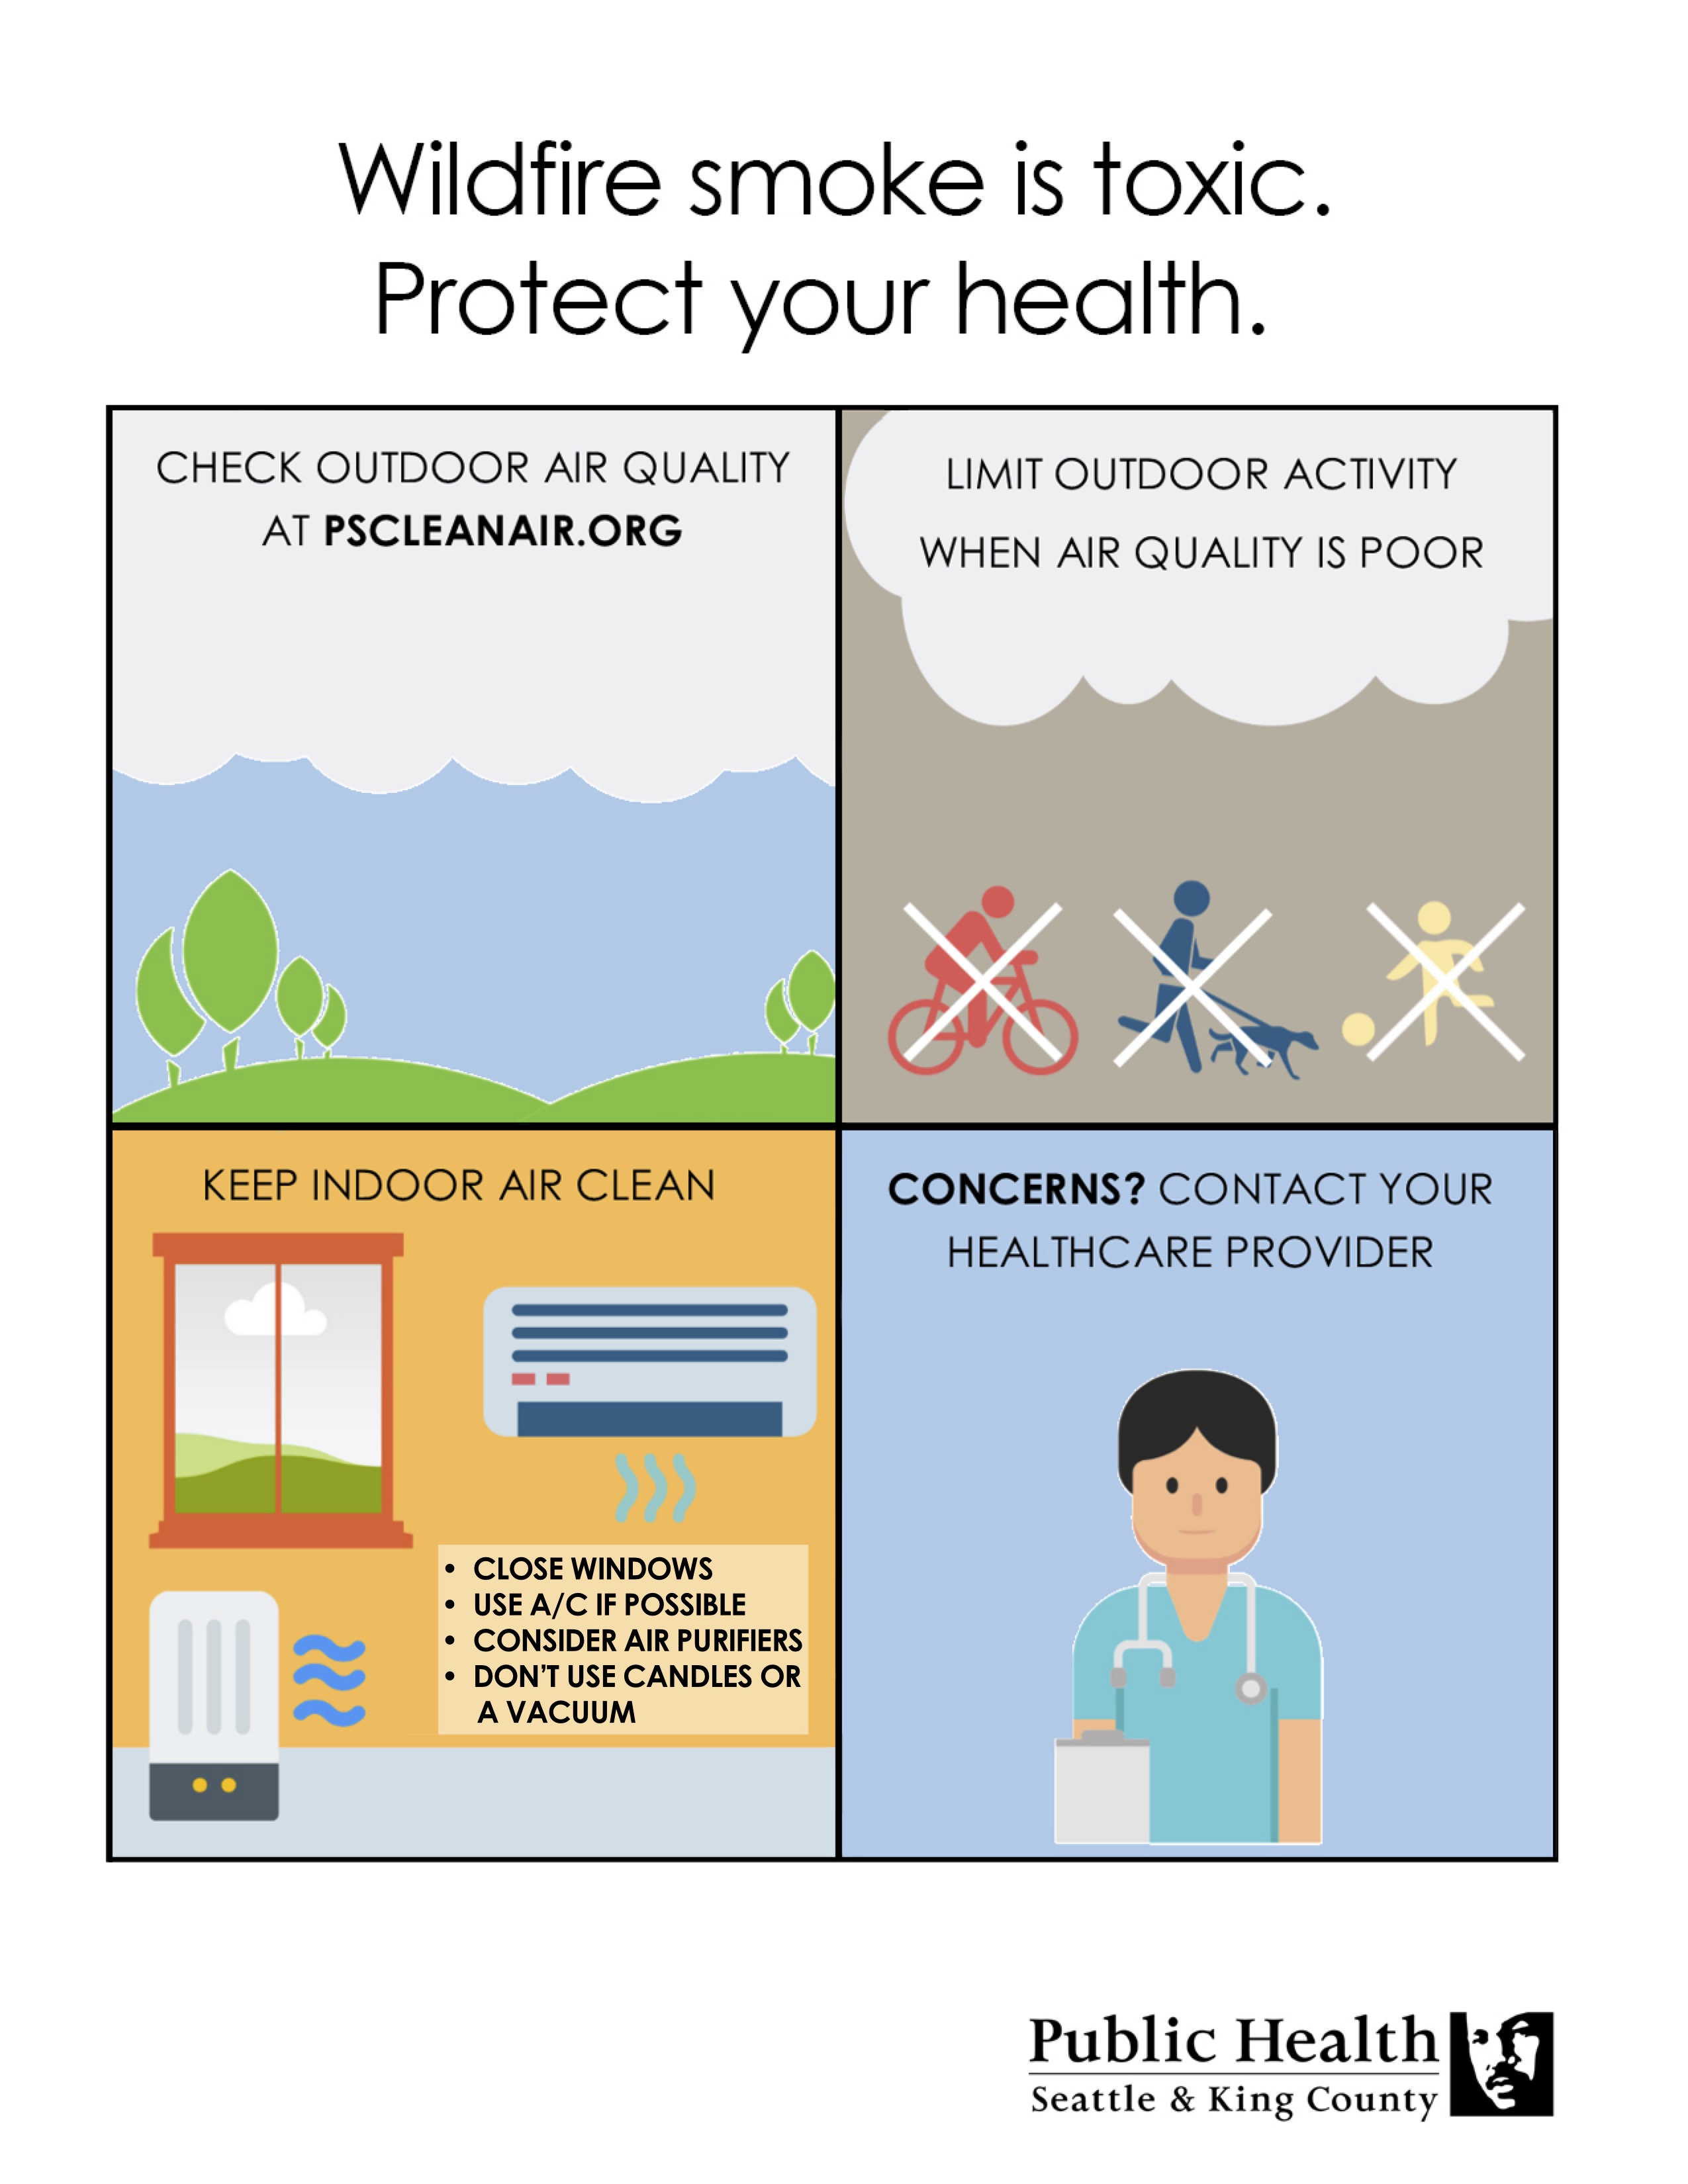 A handout titled "Wildfire Smoke is Toxic. Protect your health" 4 images have 1 message per slide. 1. Check outdoor air quality, 2. limit outdoor activity, 3. Keep indoor air clean, 4. Concerns? Contact your health provider. BY Seattle and King County Public Health